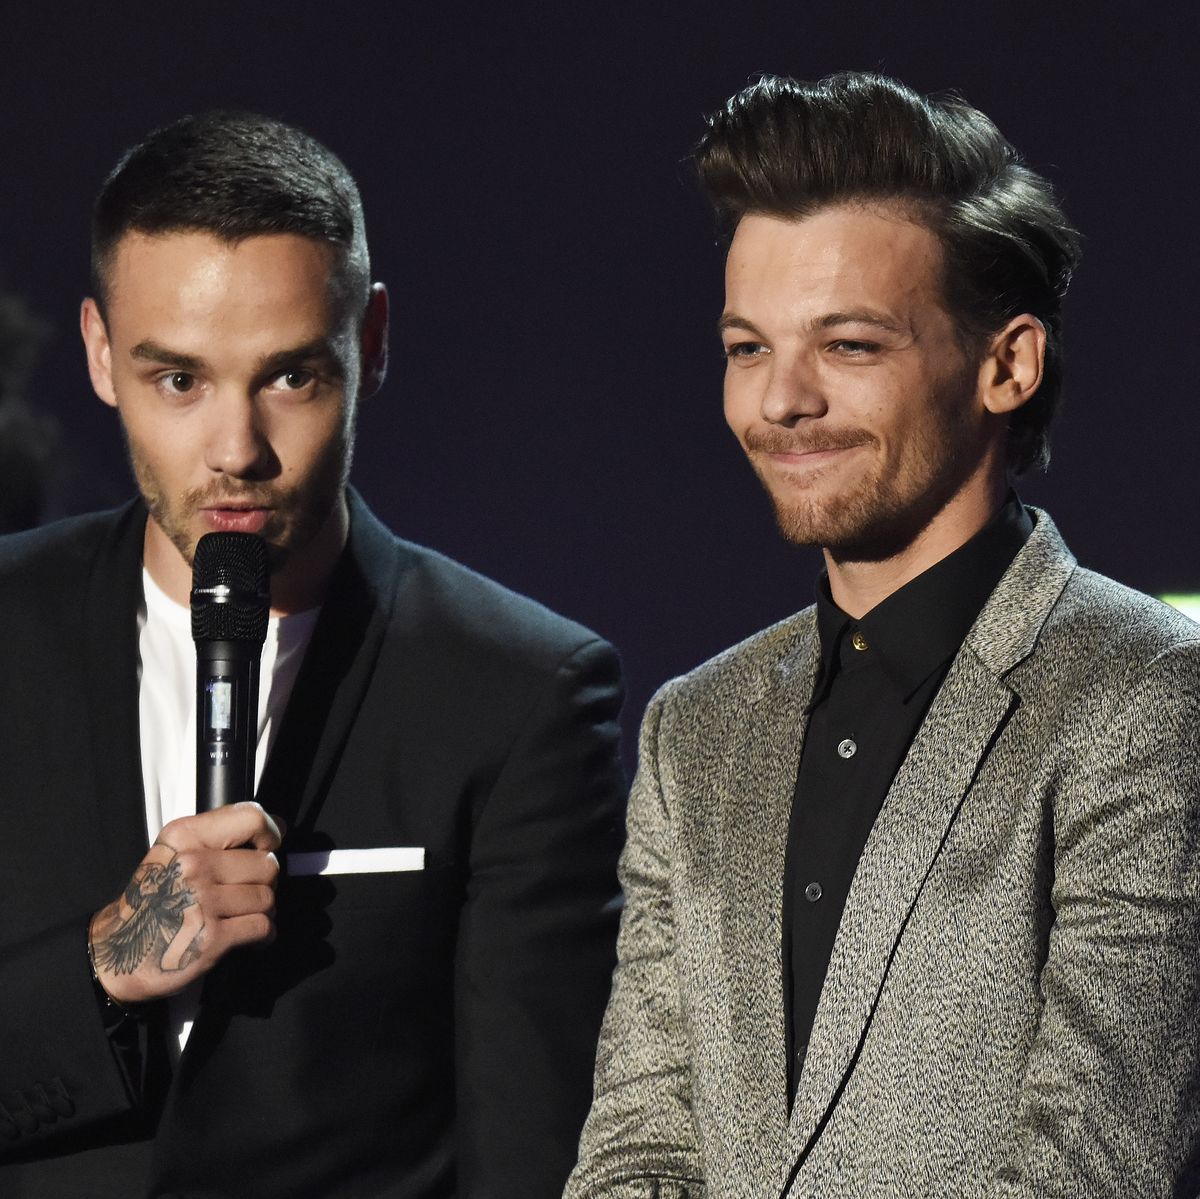 Louis Tomlinson: 'All of Those Voices' Doc Info